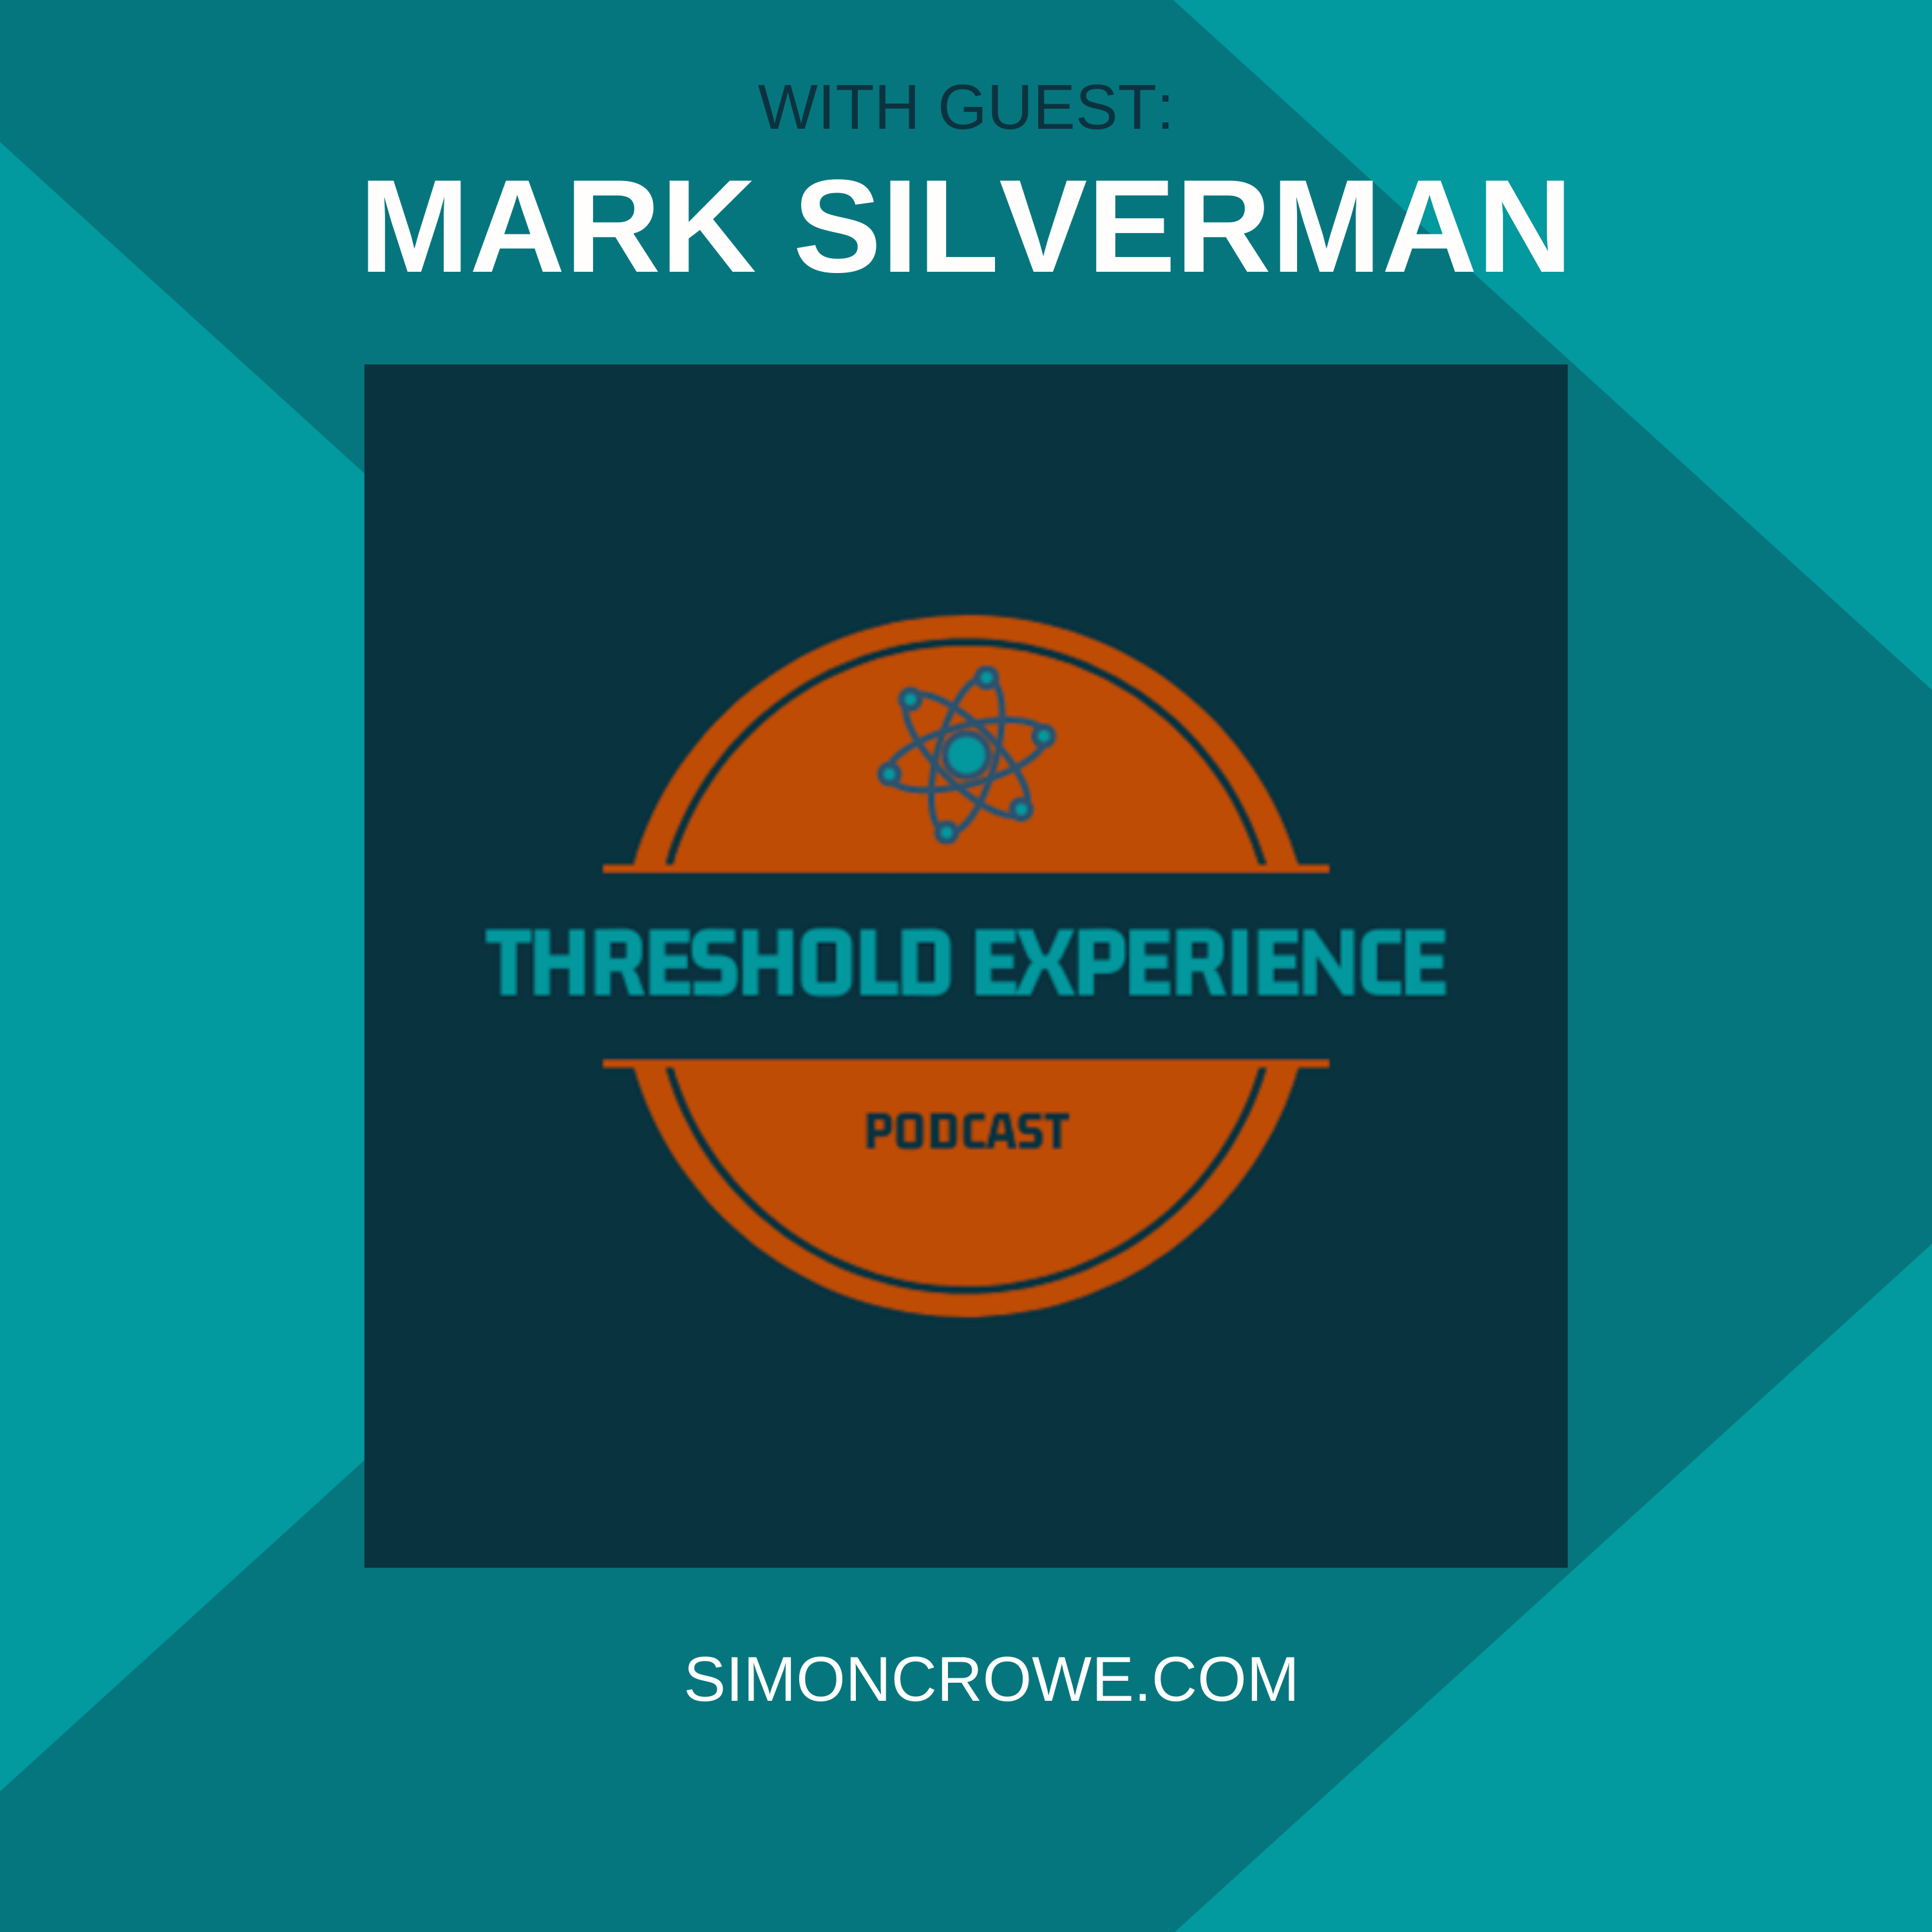 Podcast cover image showing the names of the people in discussion about threshold experiences, Simon Crowe & Mark Silverman